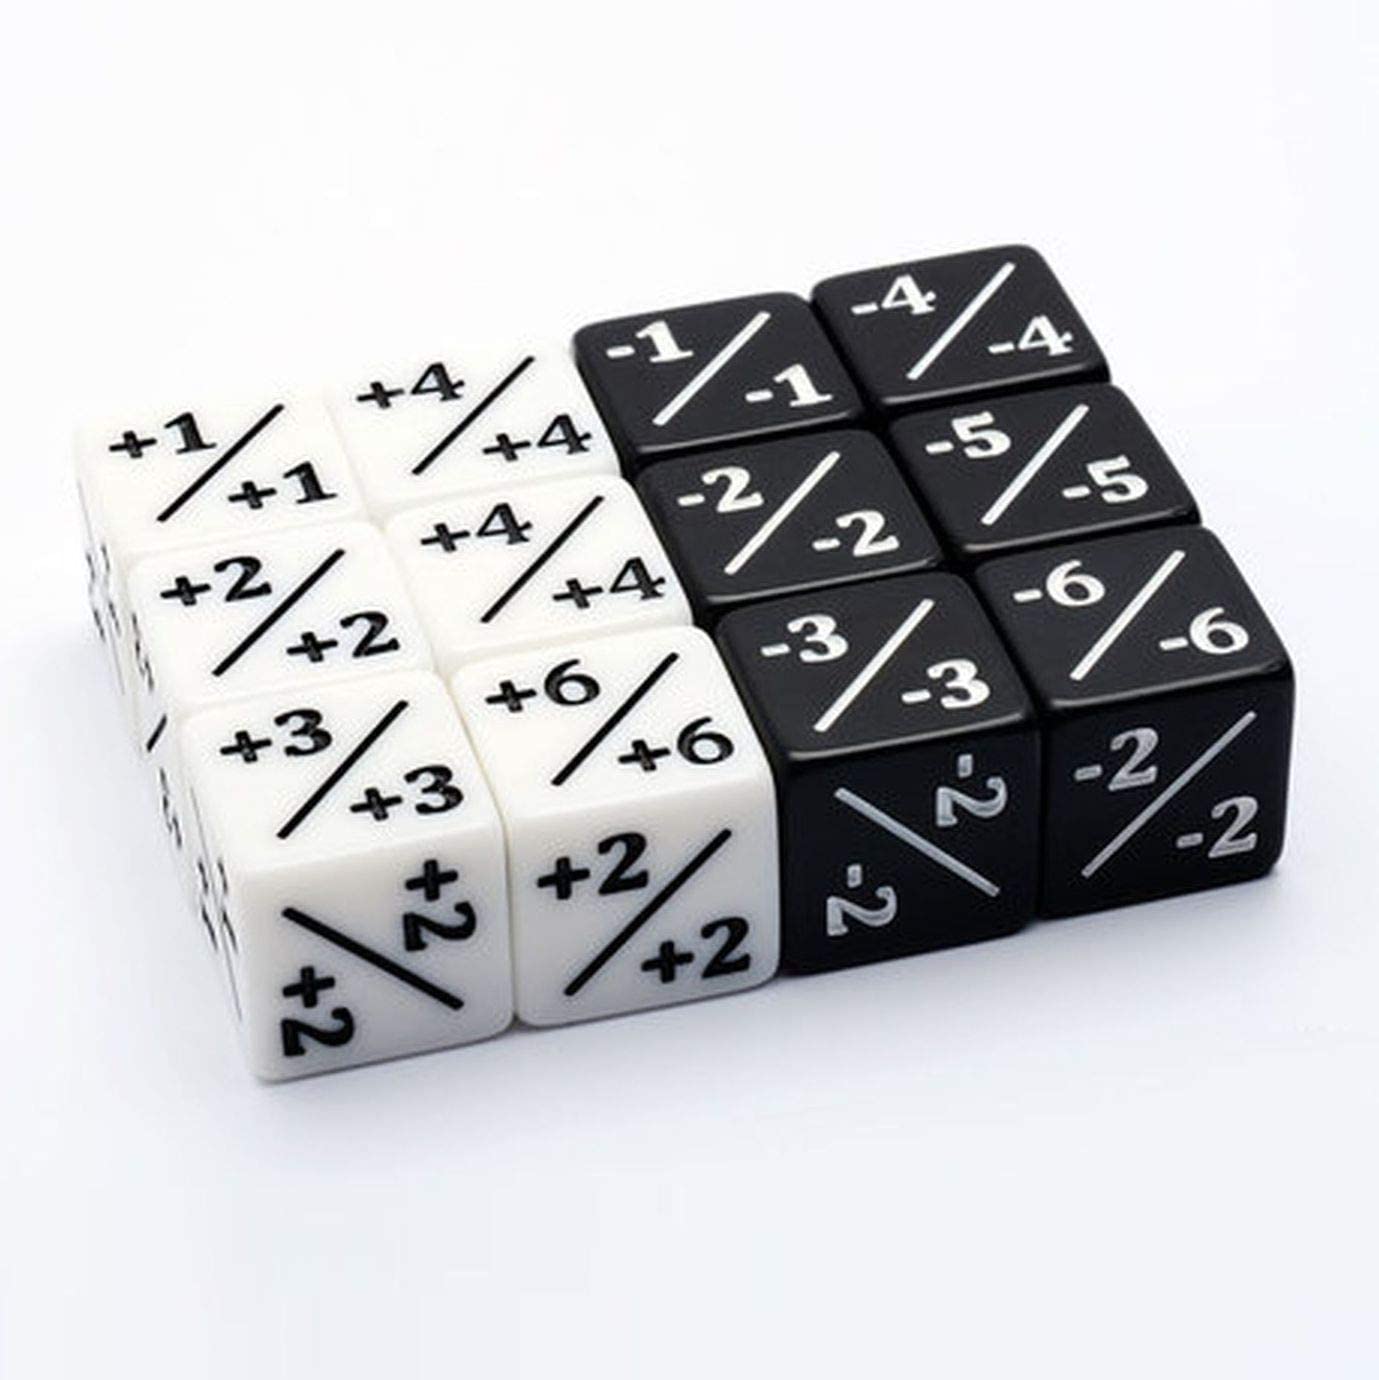 Dice Counter Positive and Negative 6 pcs per Pack